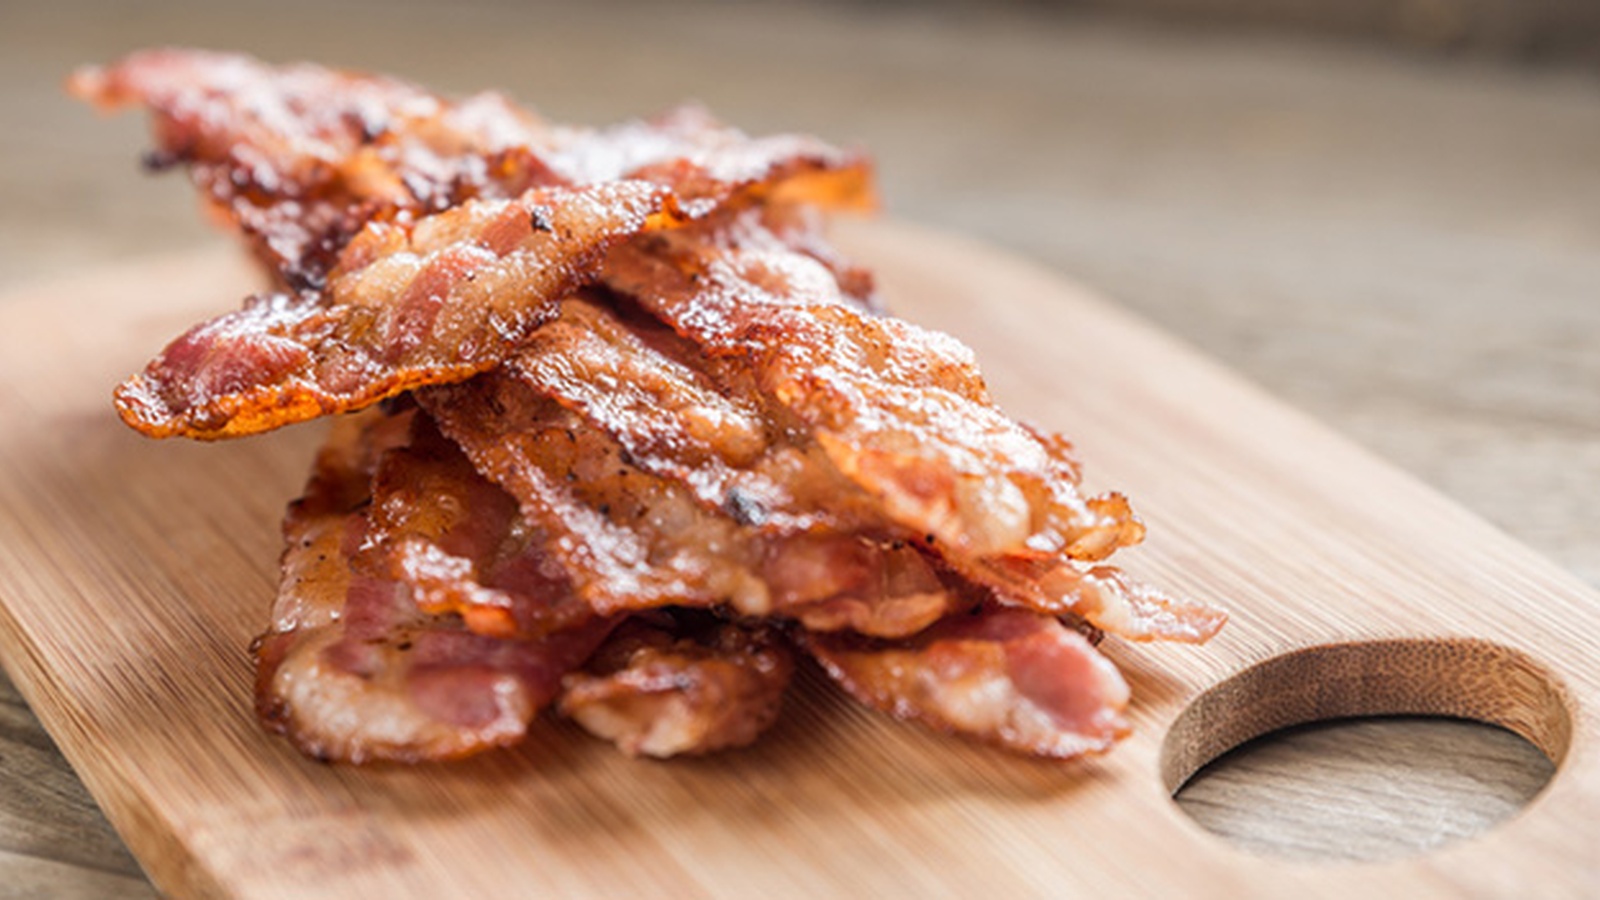 Bacon And Processed Meat Deemed Just As Bad For Your Health As Cigarettes!